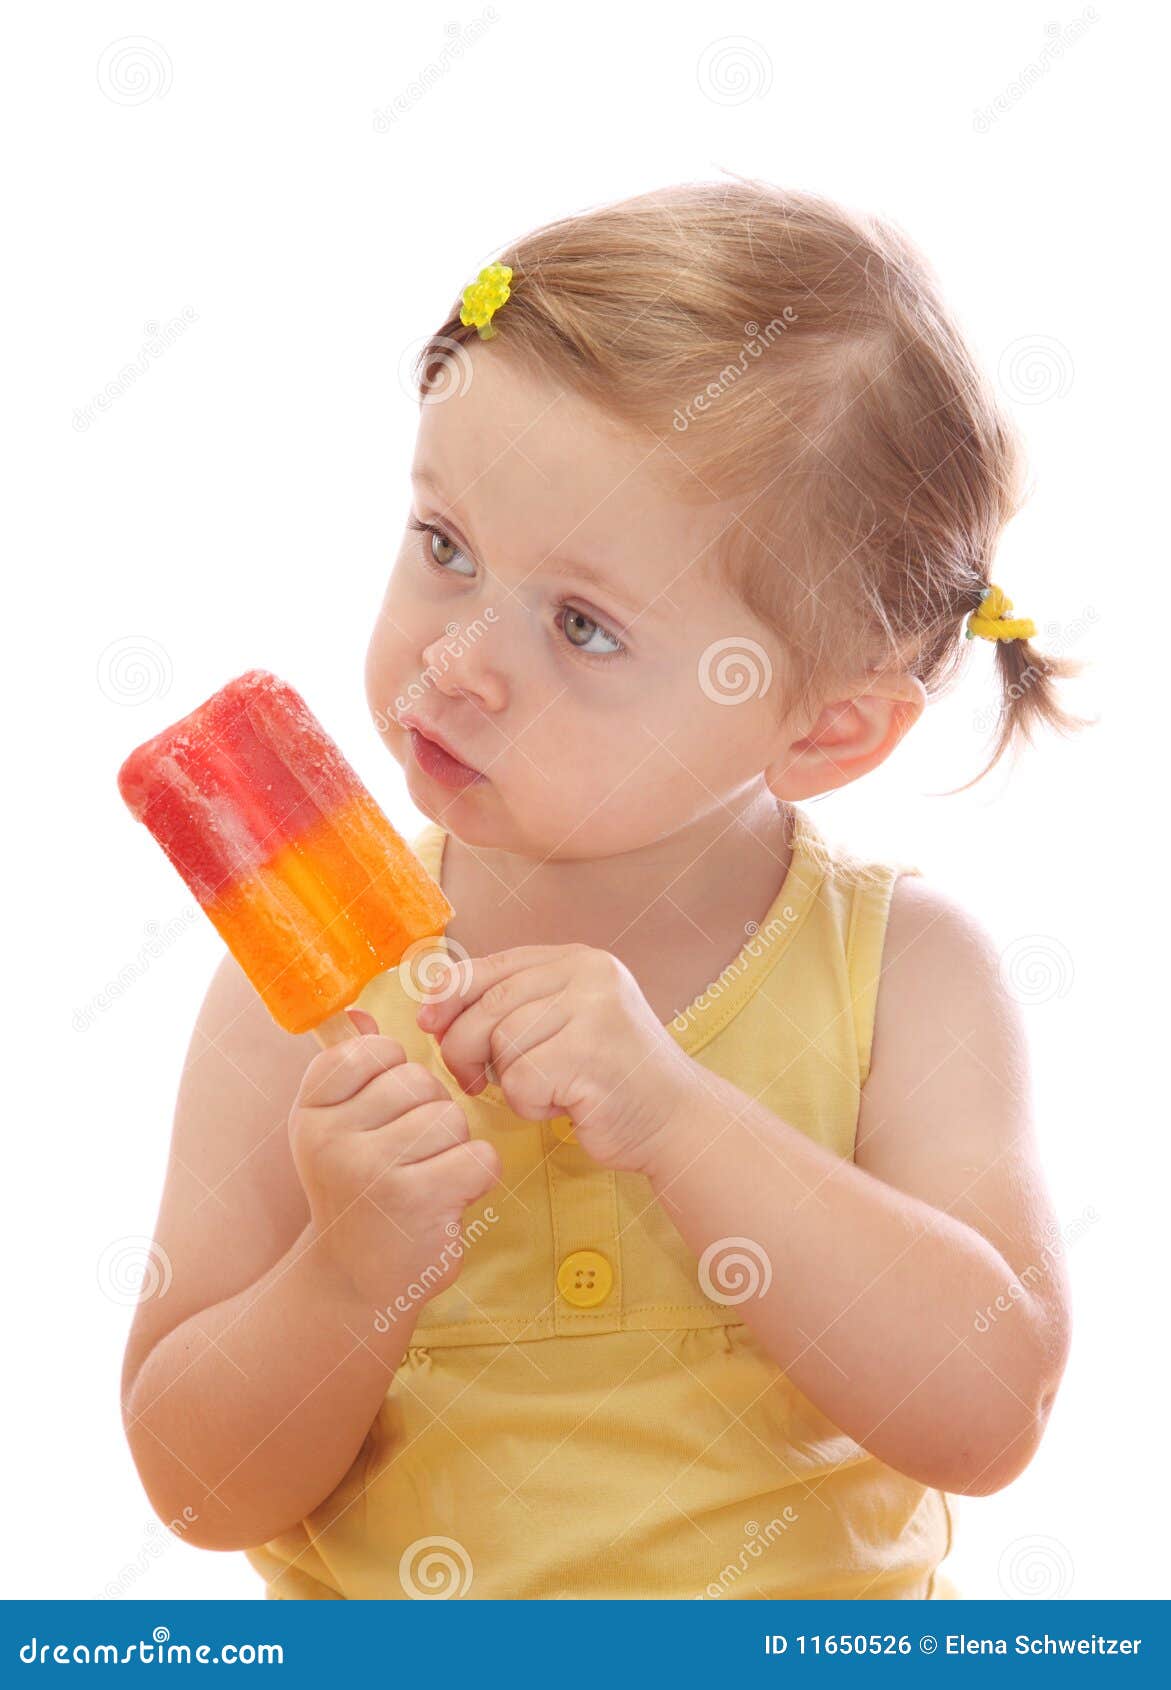 little girl eating colorful ice lolly